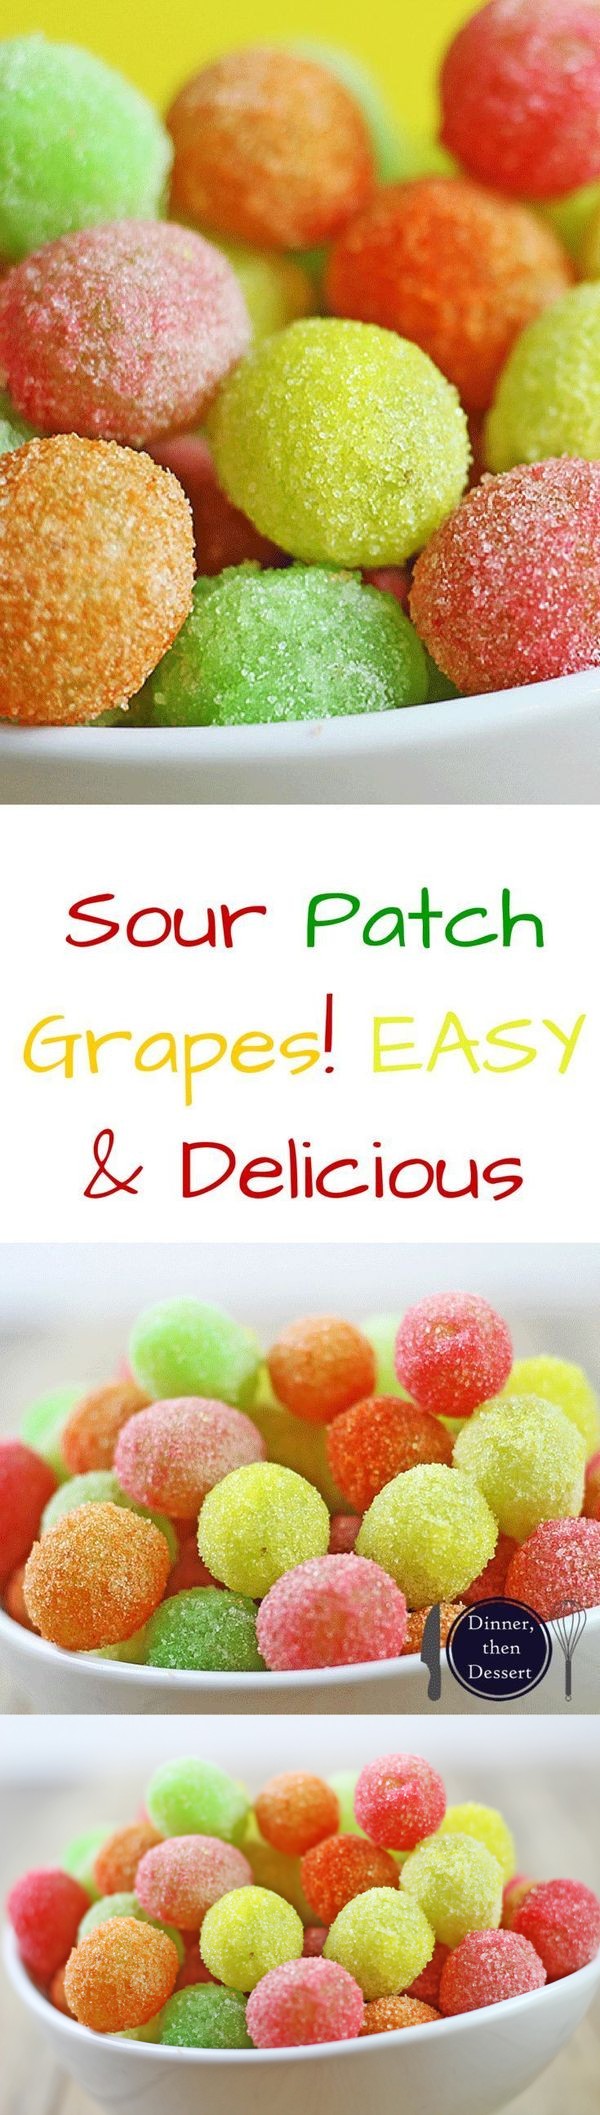 Sour Patch Grapes - Healthier than the Candy